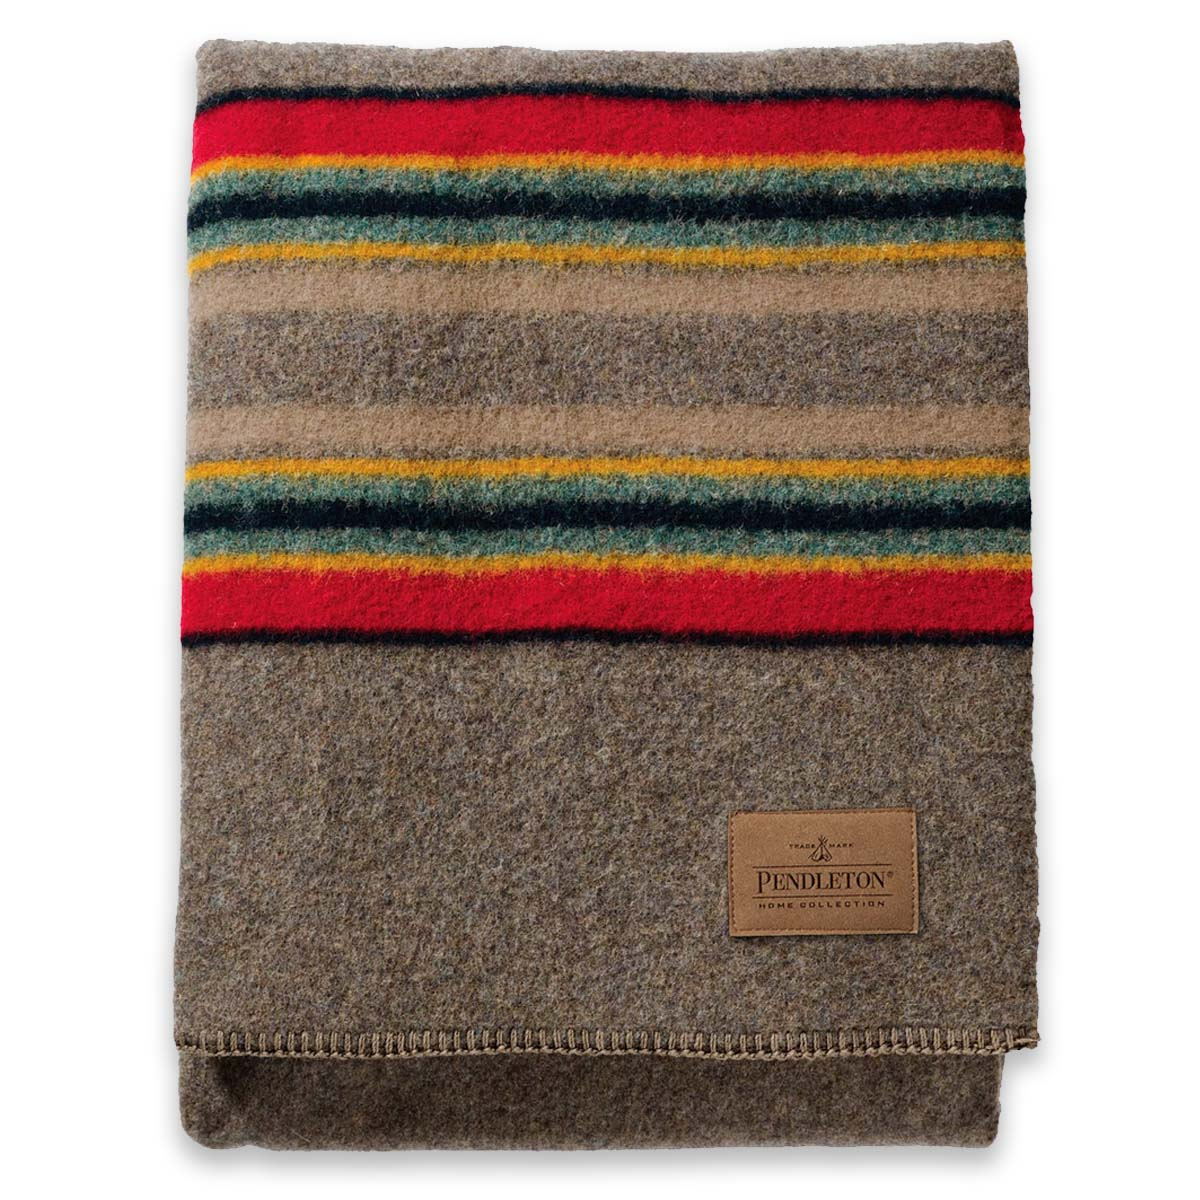 Pendleton Yakima Camp Blanket Throw Mineral Umber, perfectly sized for the sofa, chair or foot of the bed